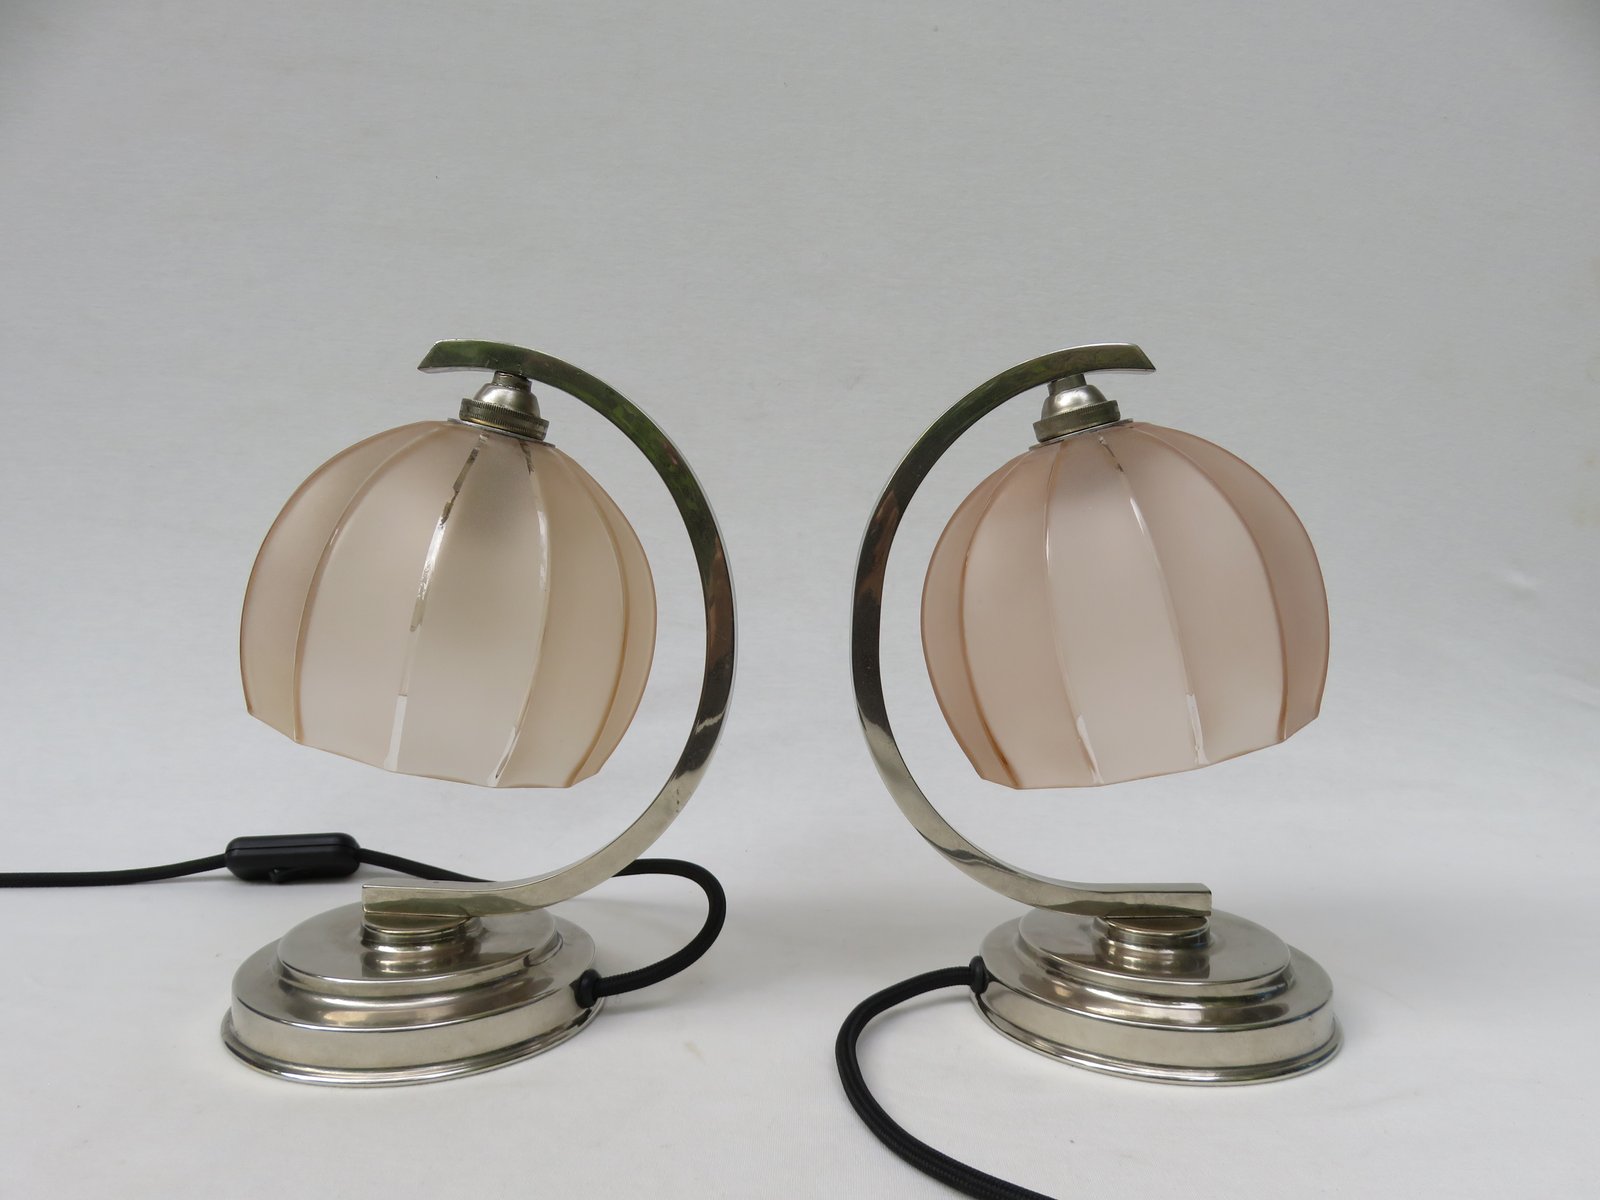 Vintage French Art Deco Bedside Table Lamps, Set of 2 for